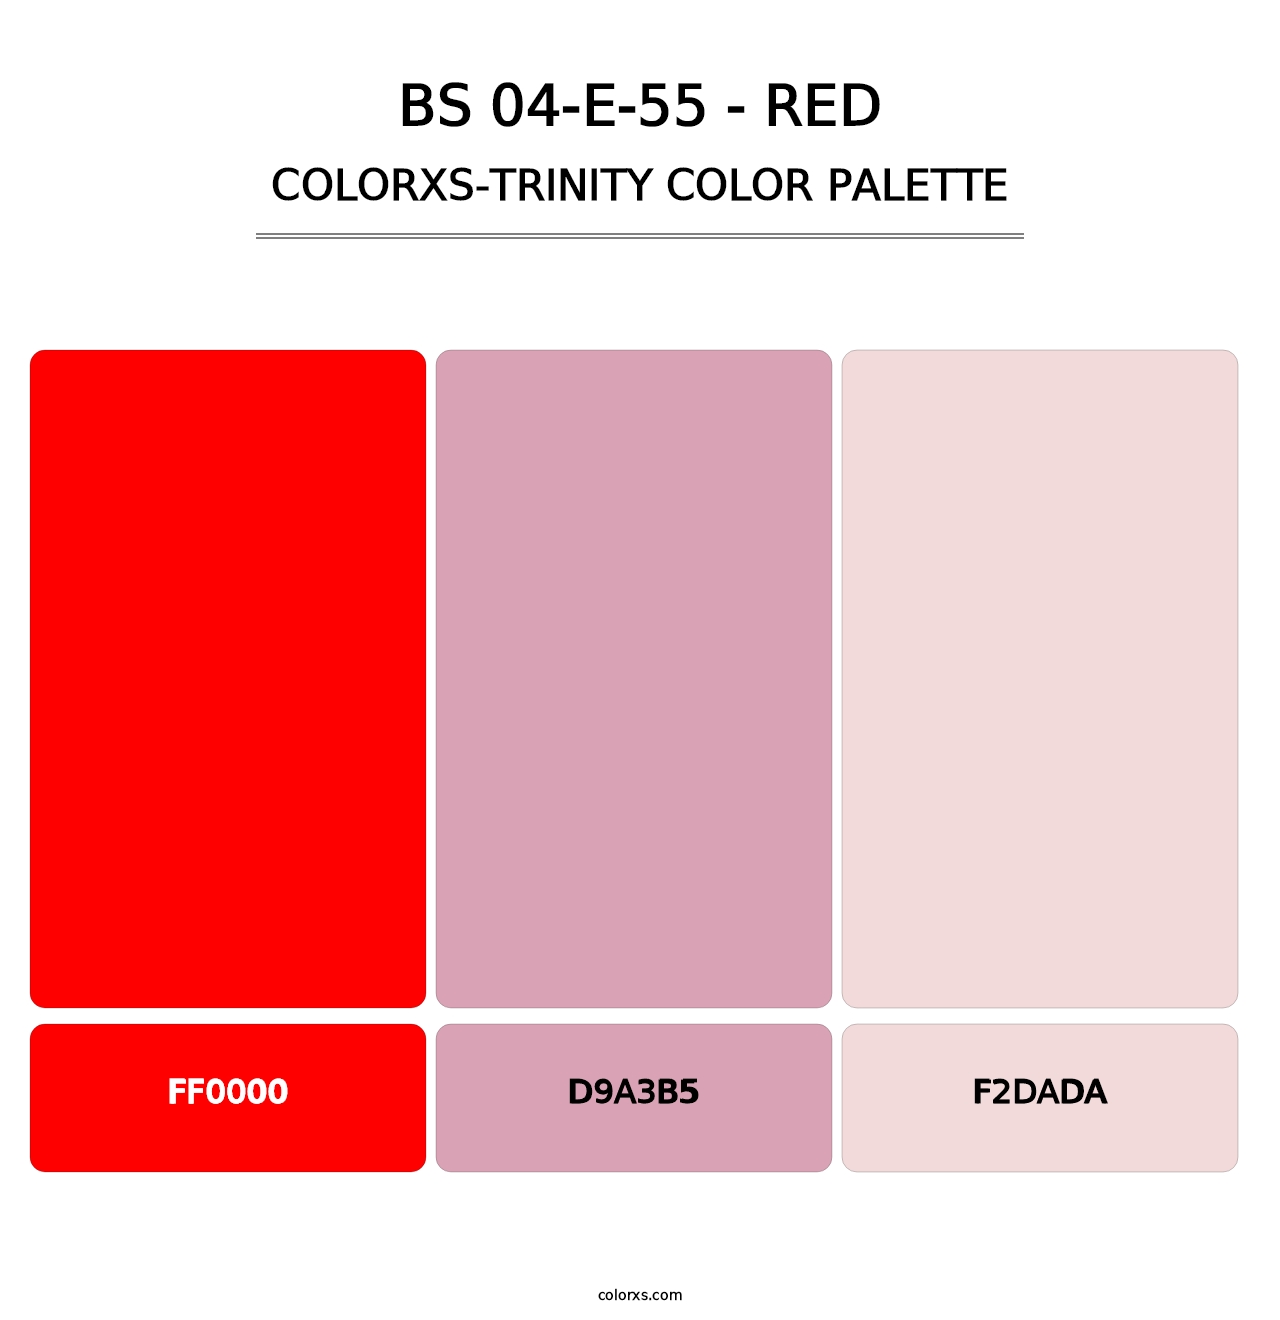 BS 04-E-55 - Red - Colorxs Trinity Palette